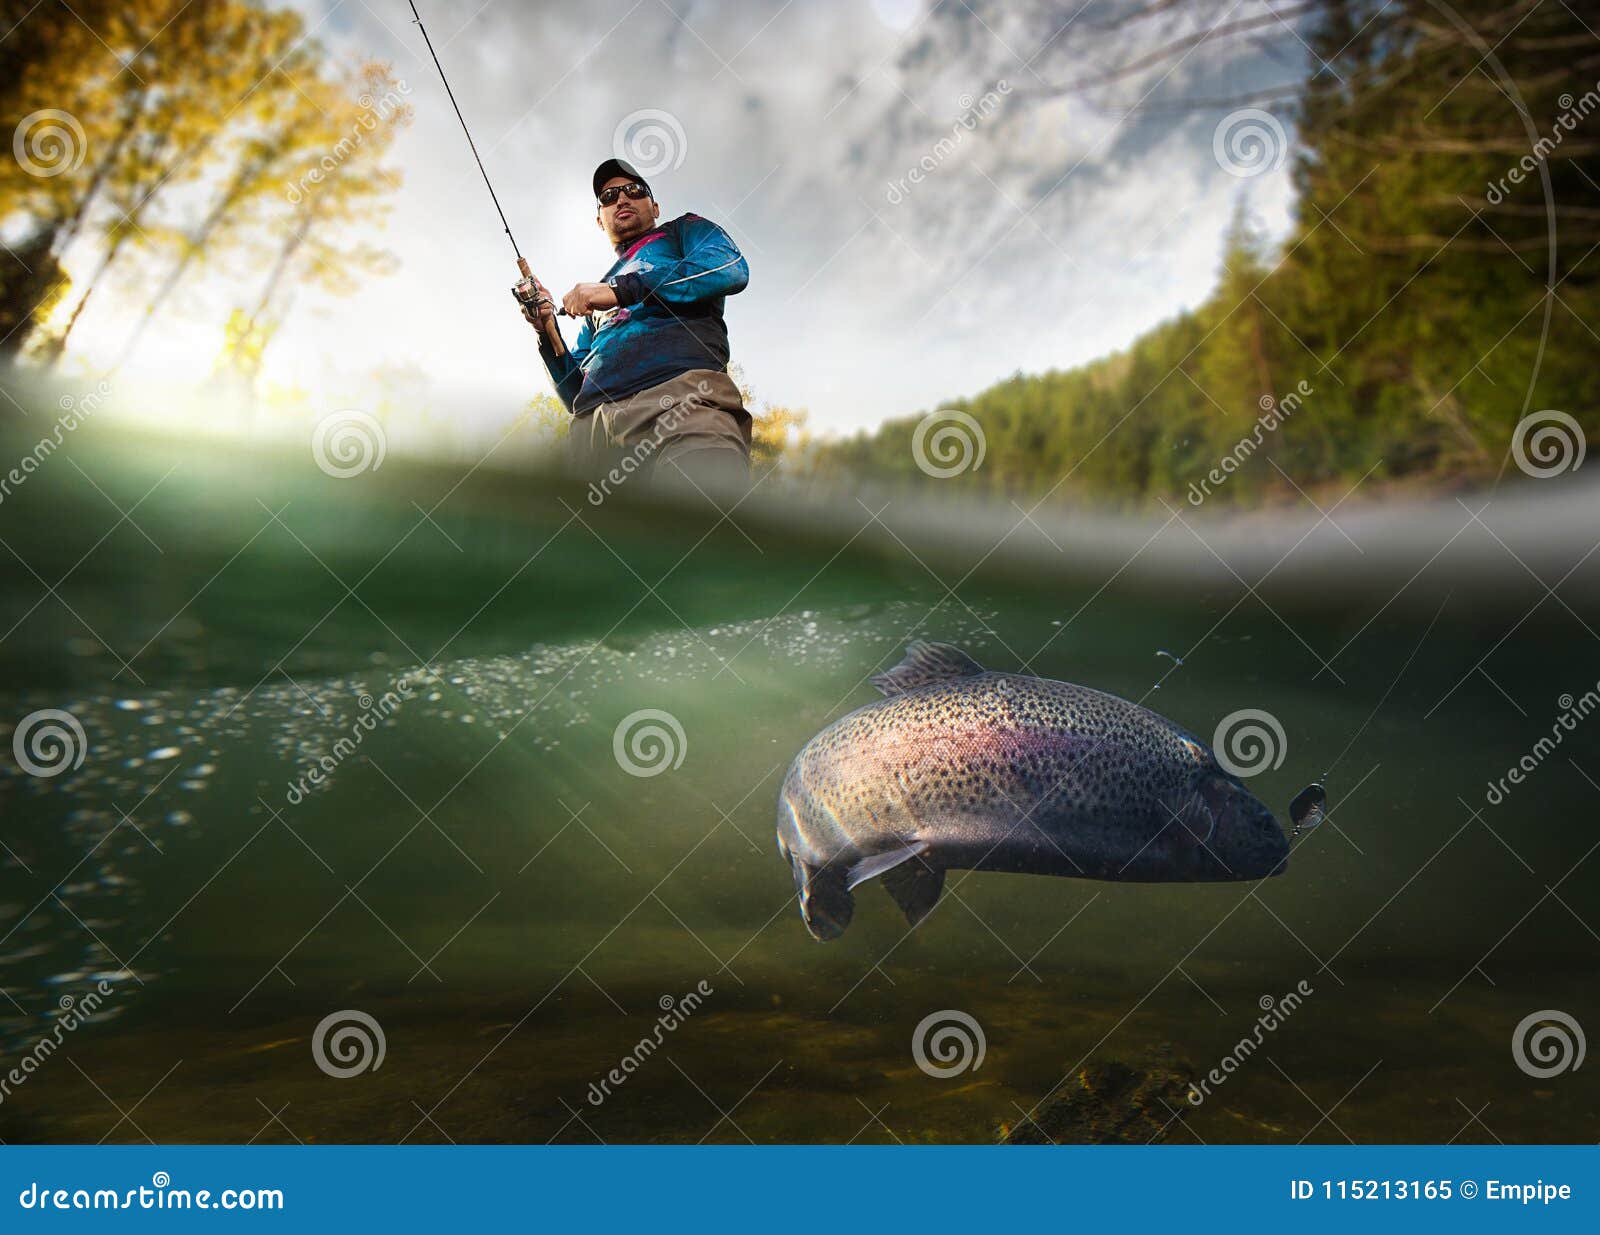 fisherman and trout, underwater view.